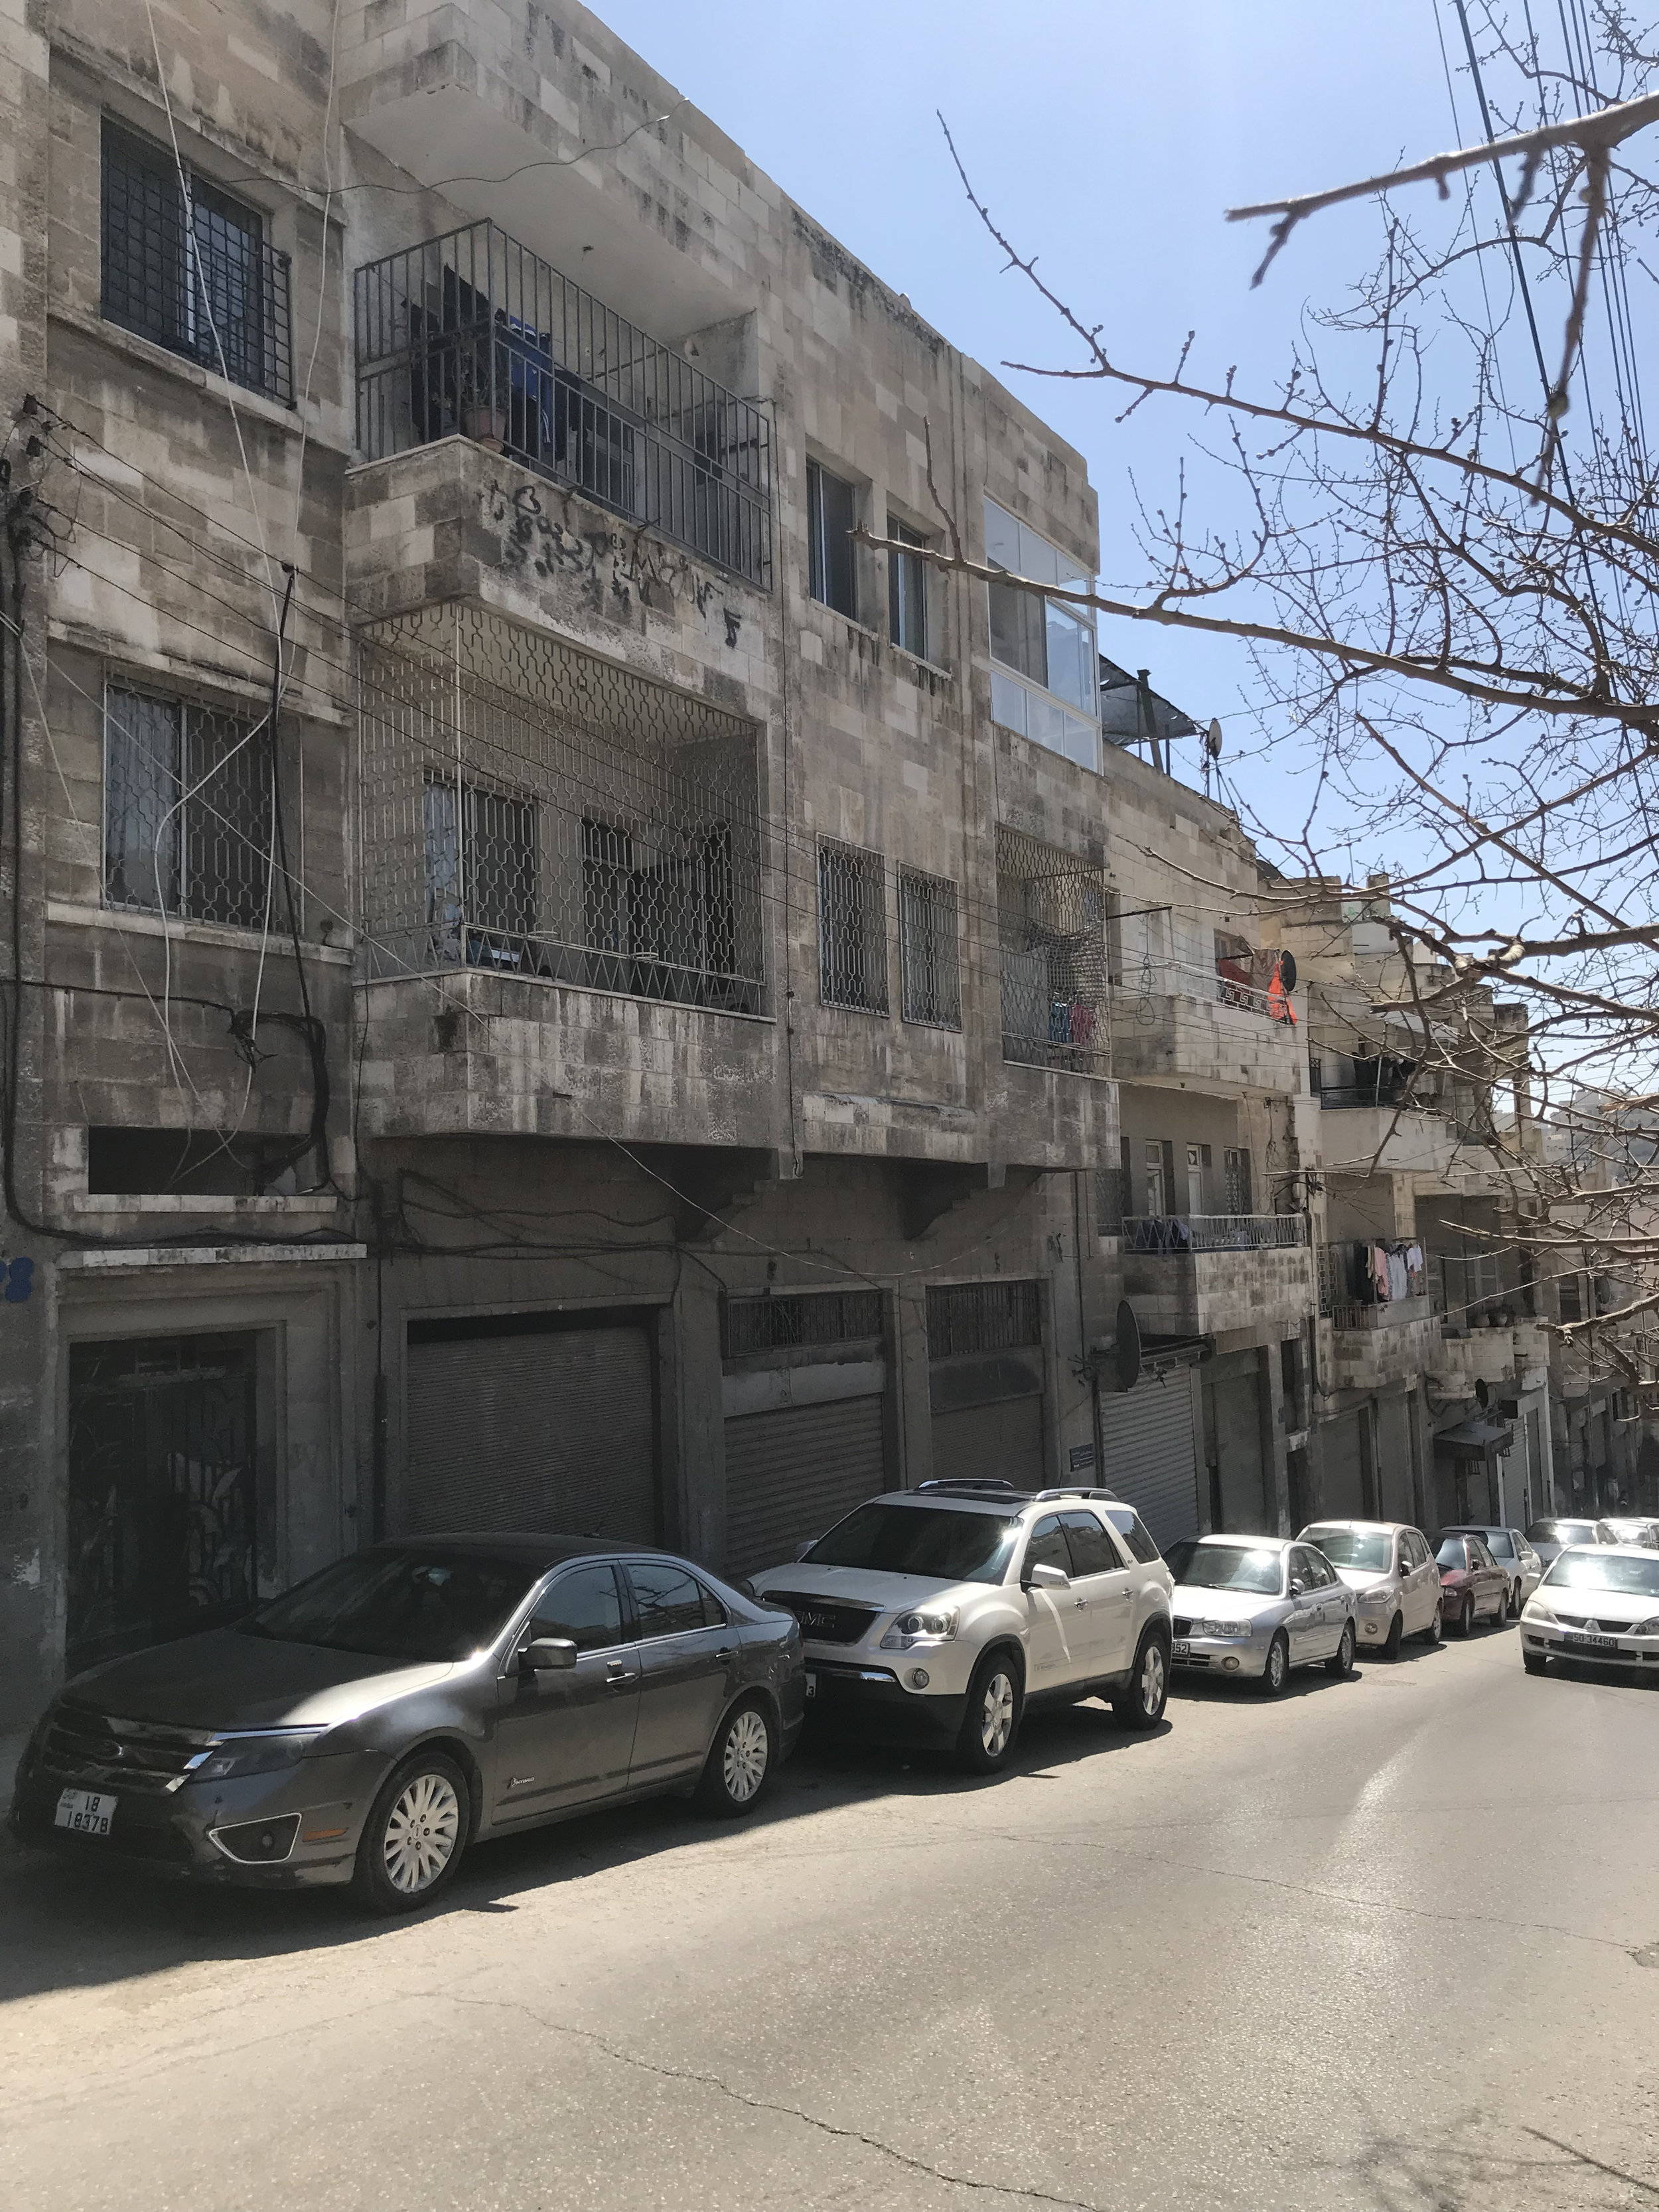  streets of downtown amman